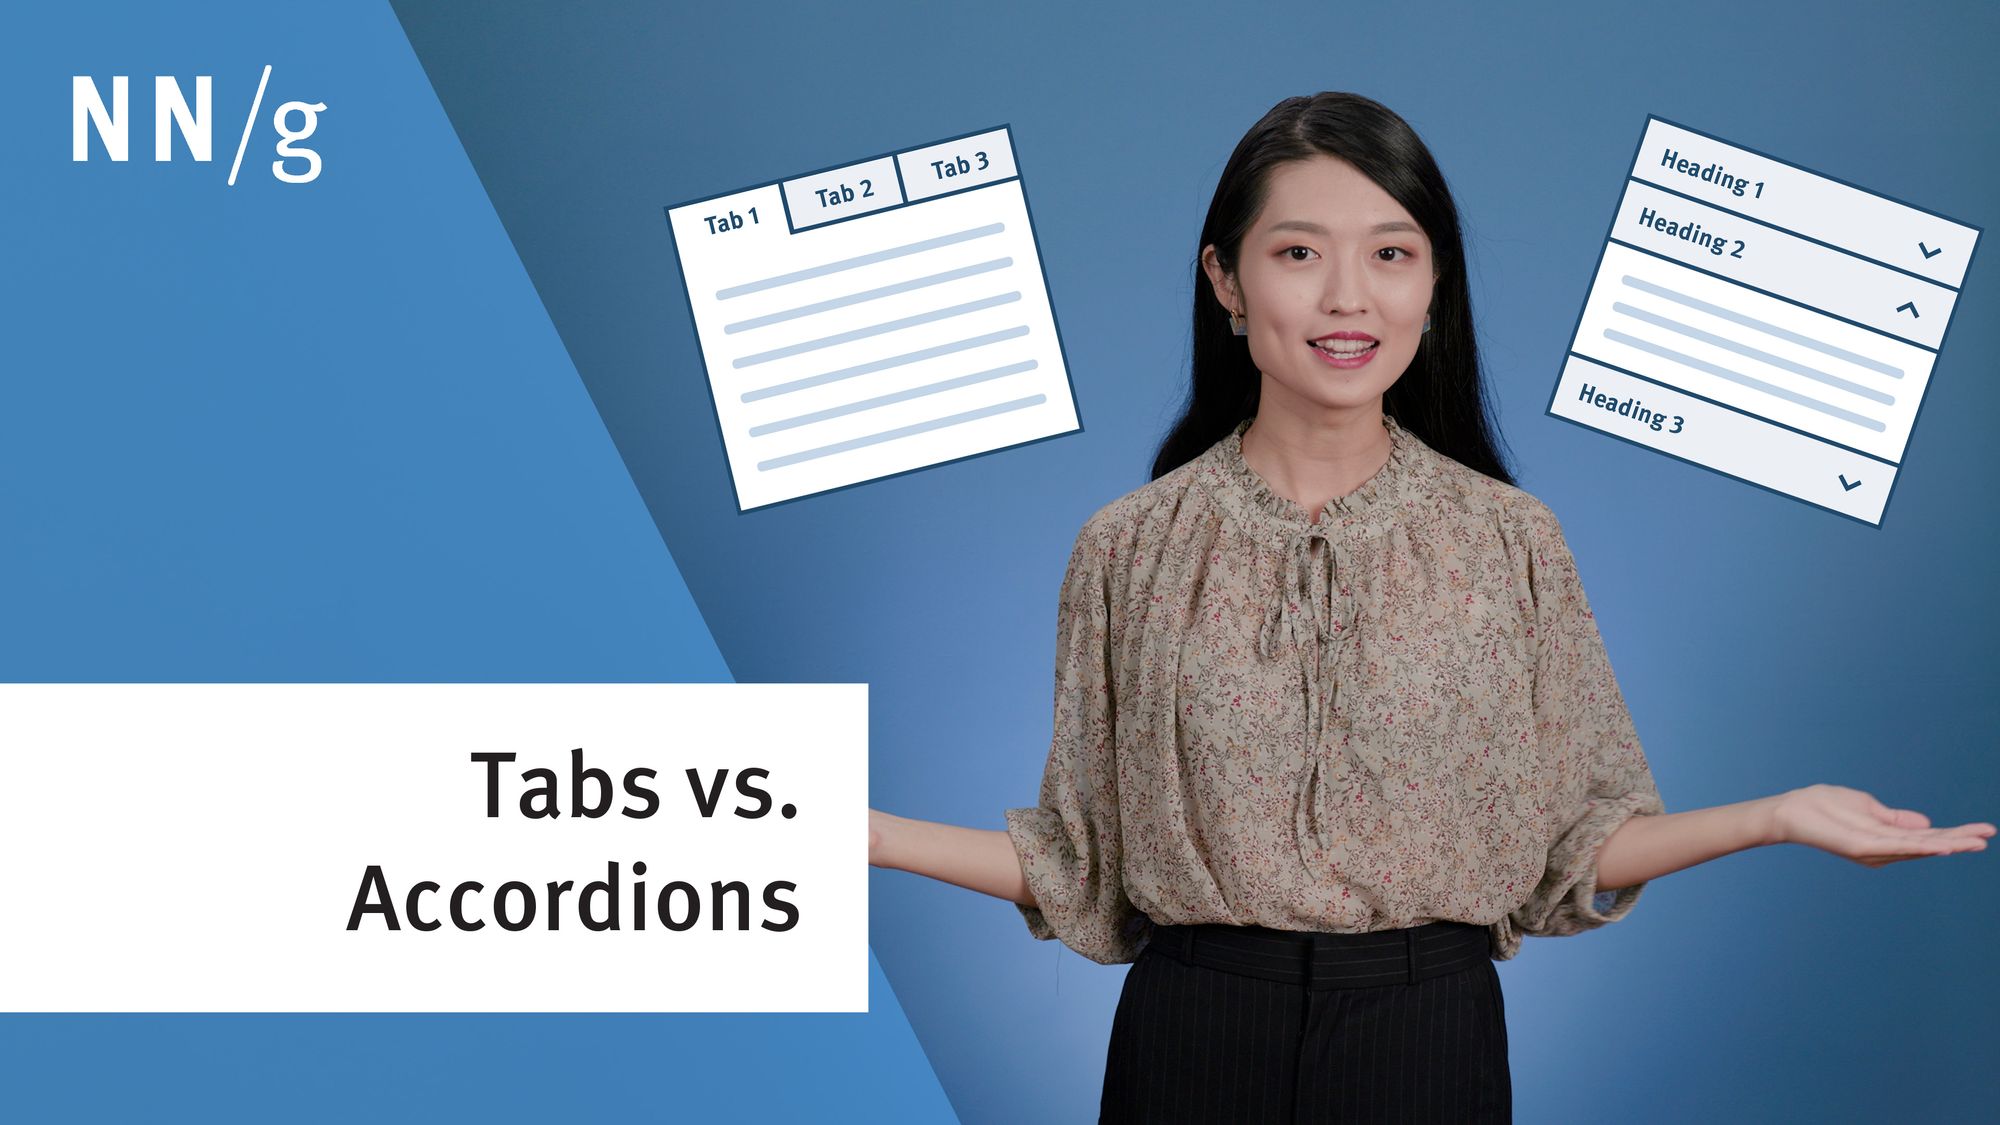 Tabs vs. Accordions: When to Use Each (Video)